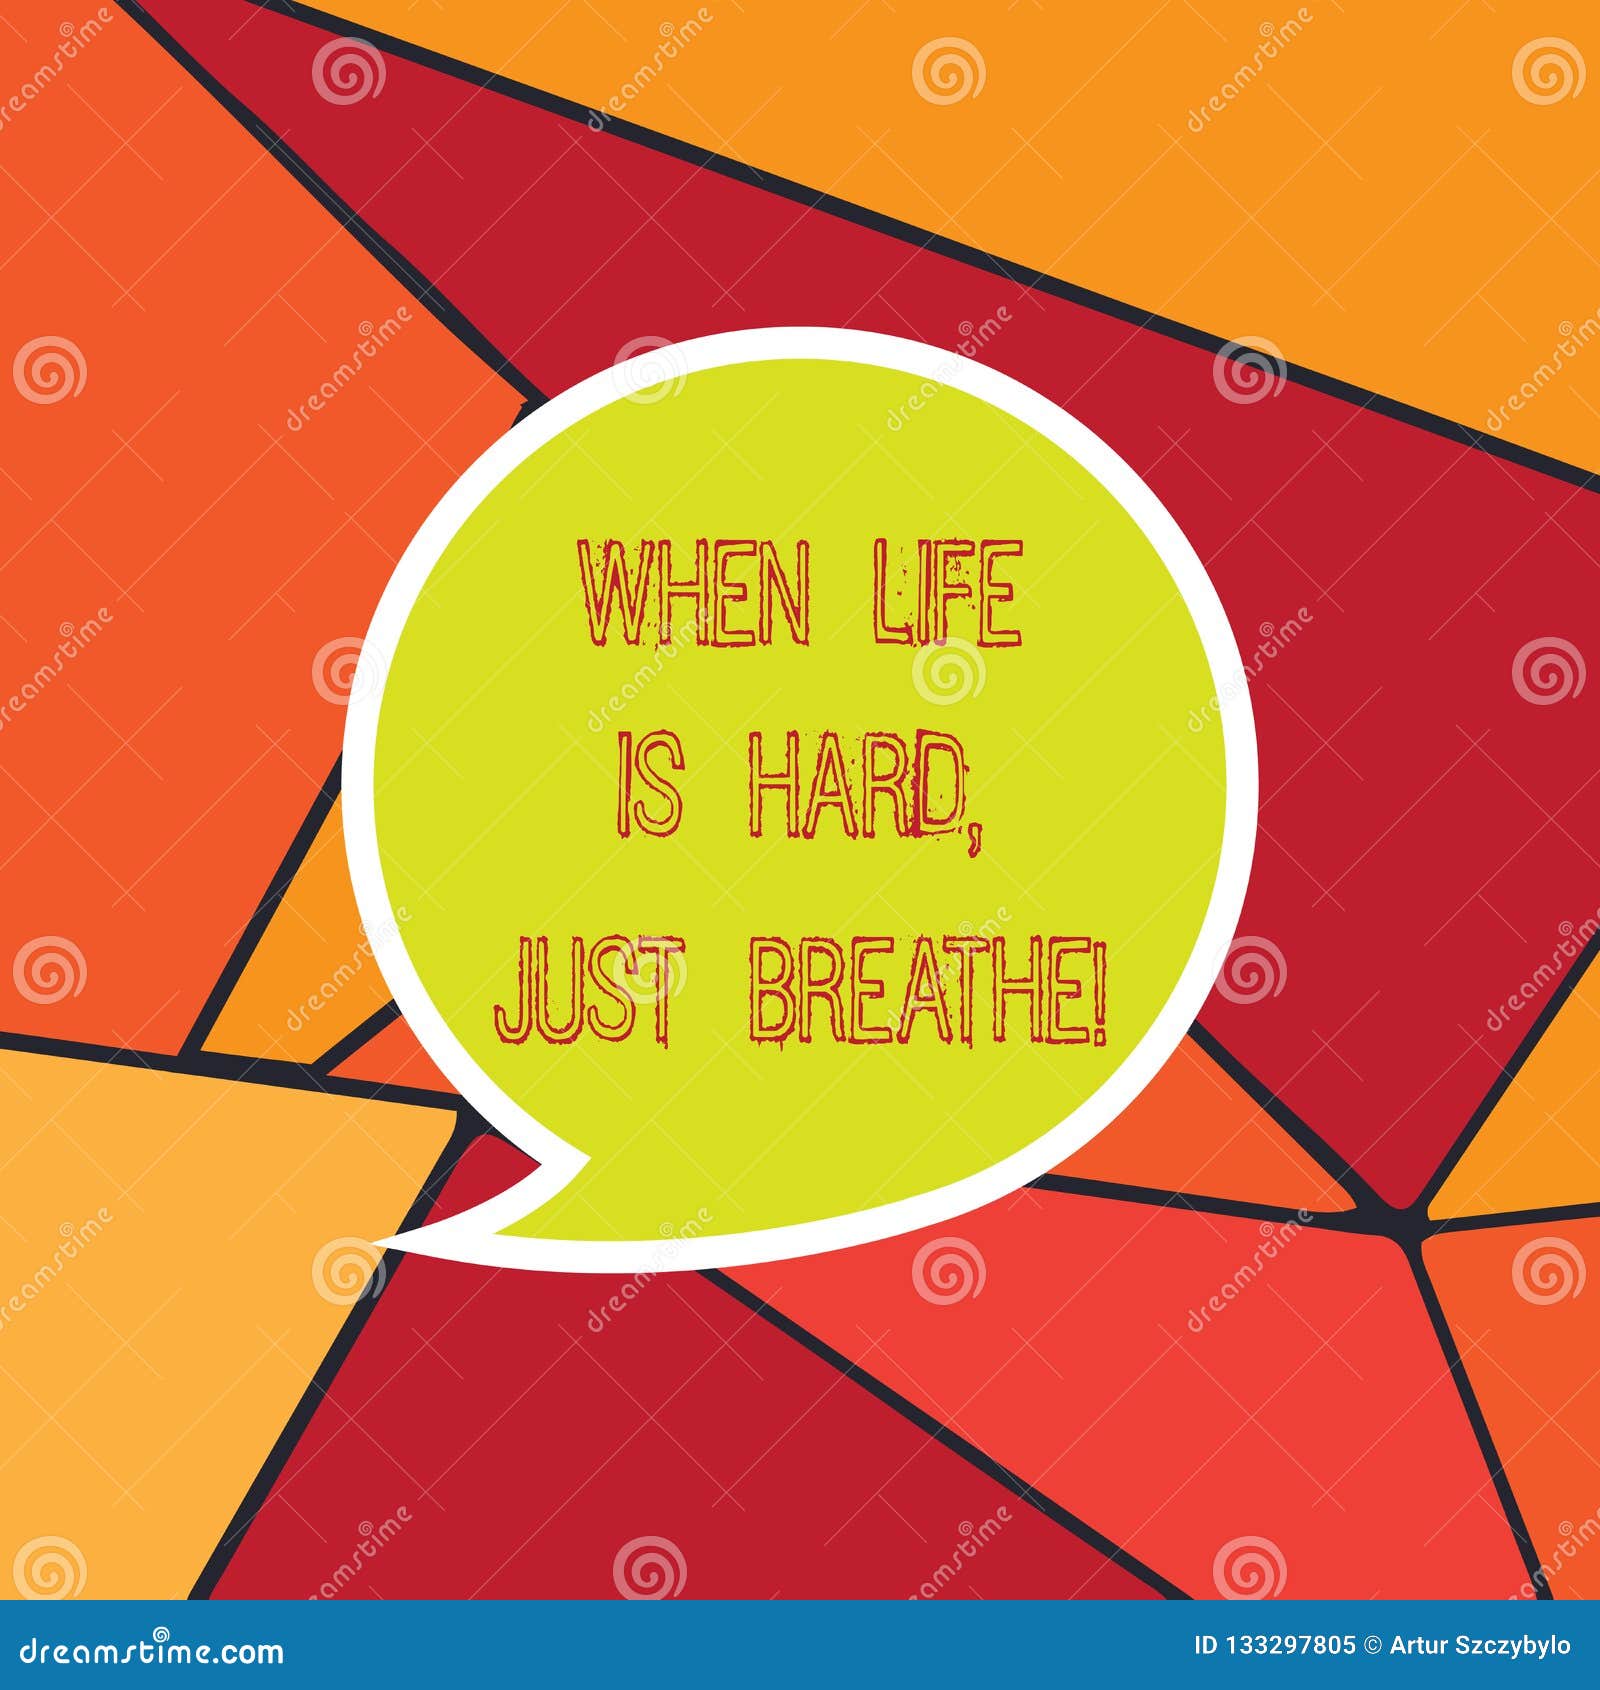 Handwriting Text When Life Is Hard Just Breathe Concept Meaning Take A Break To Overcome Difficulties Blank Speech Bubble Sticker Stock Image Image Of Relax Meditation